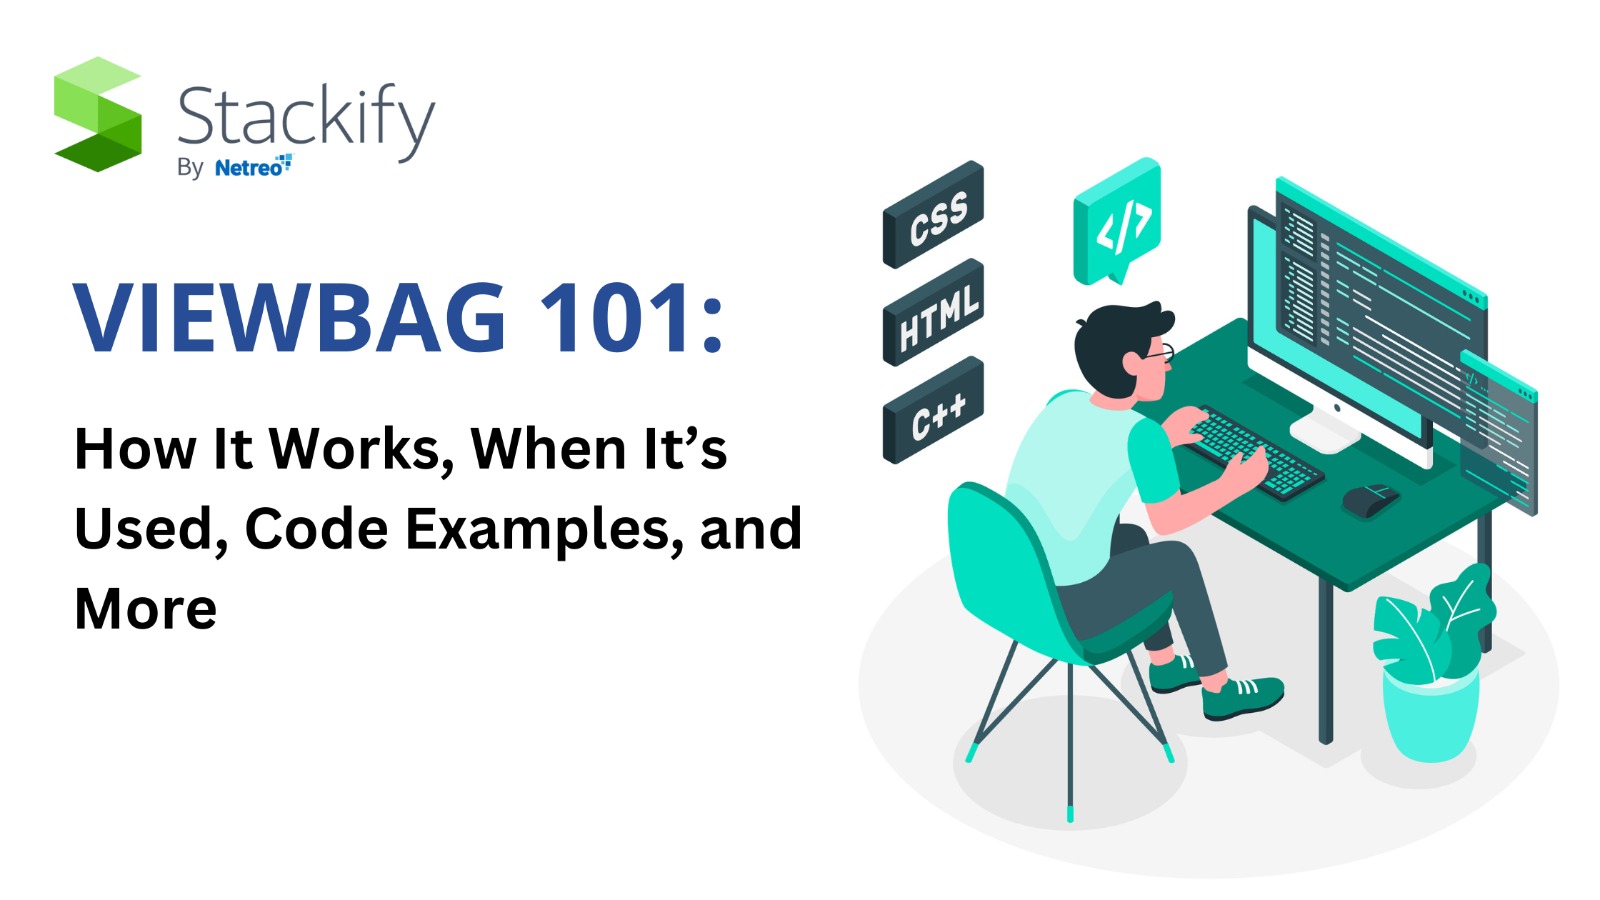 ViewBag 101: How It Works, When It’s Used, Code Examples, and More